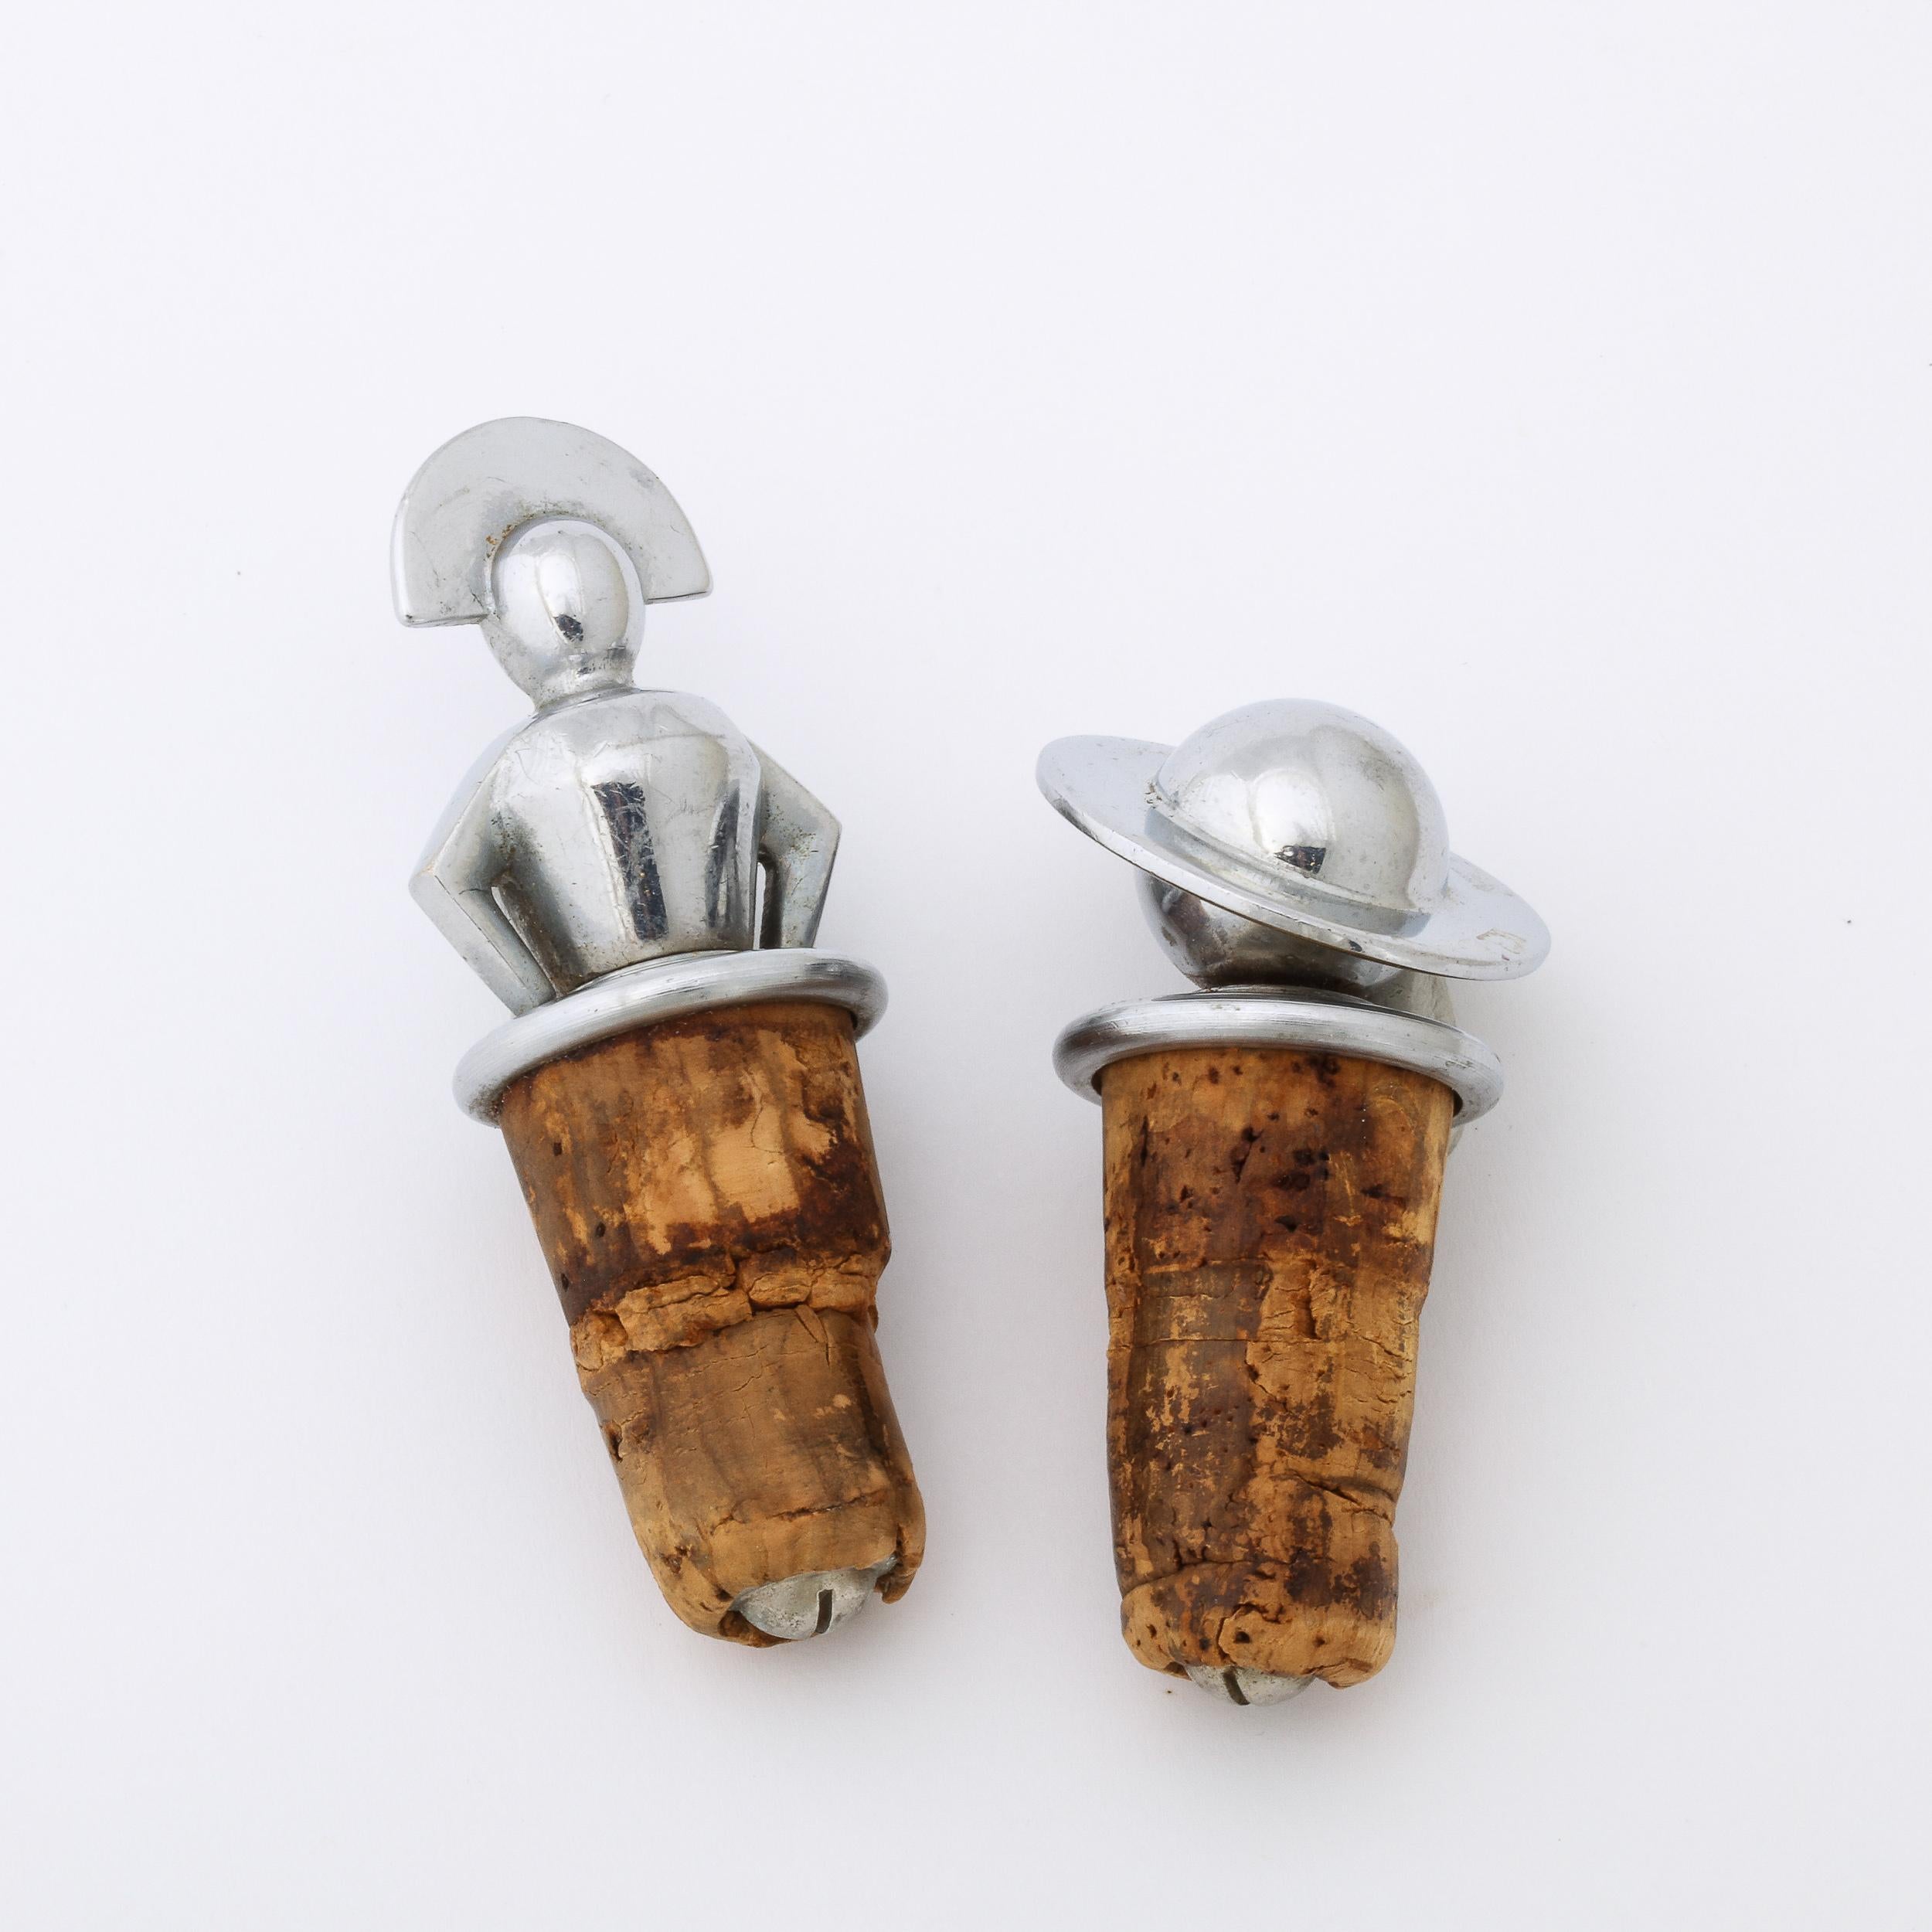 This charming pair of Art Deco Wine Stoppers Originates from the United States Circa 1930, beautifully fabricated in Polished Chrome.  The art deco period produced some of the most beautiful and sought after pieces of artwork ever made. These wine